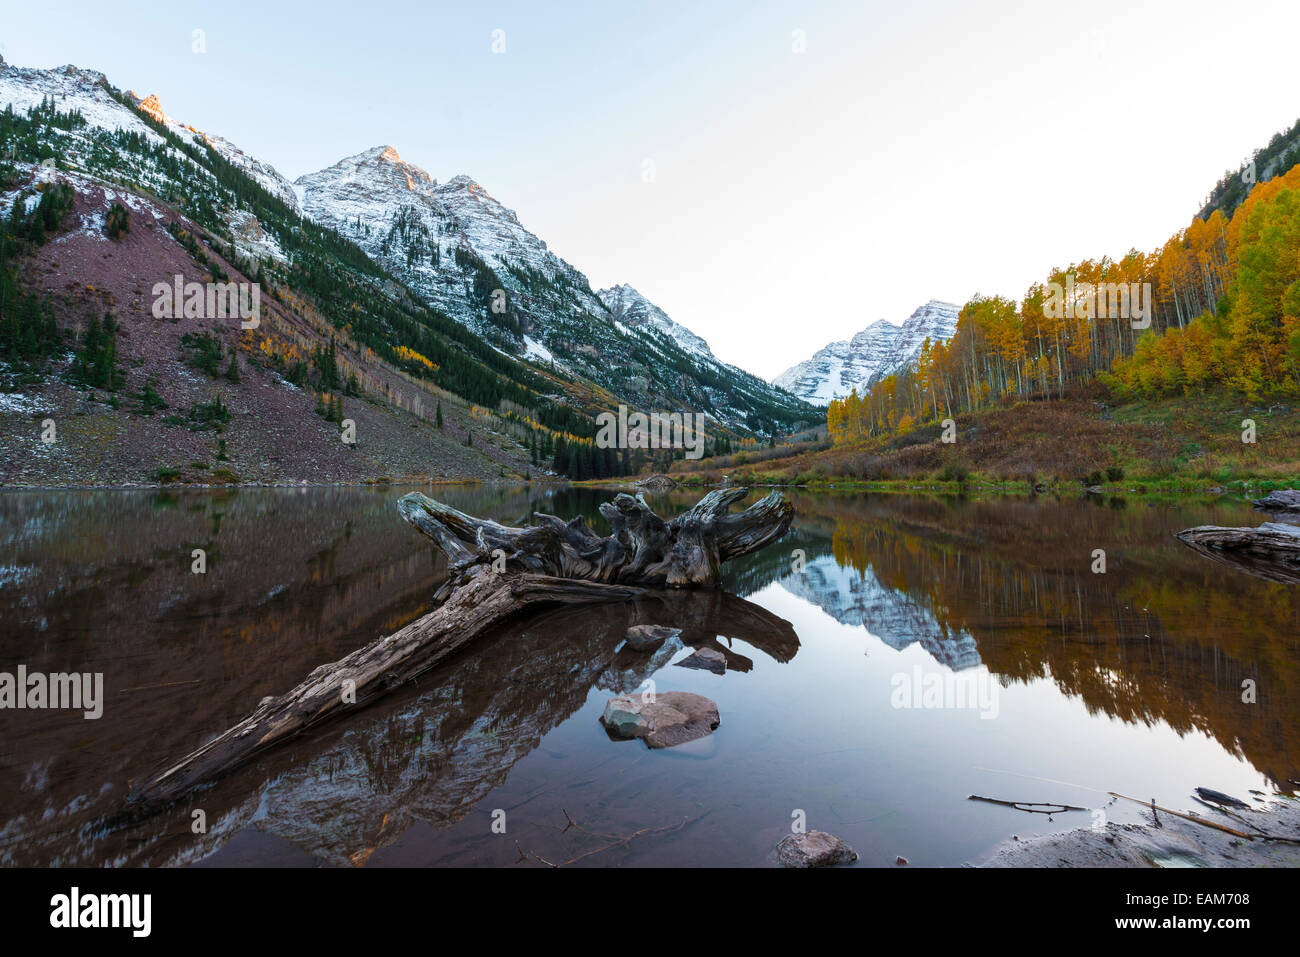 Maroon Bells and its Reflection in the Lake with Fall foliage in Peak at Aspen, Colorado Stock Photo